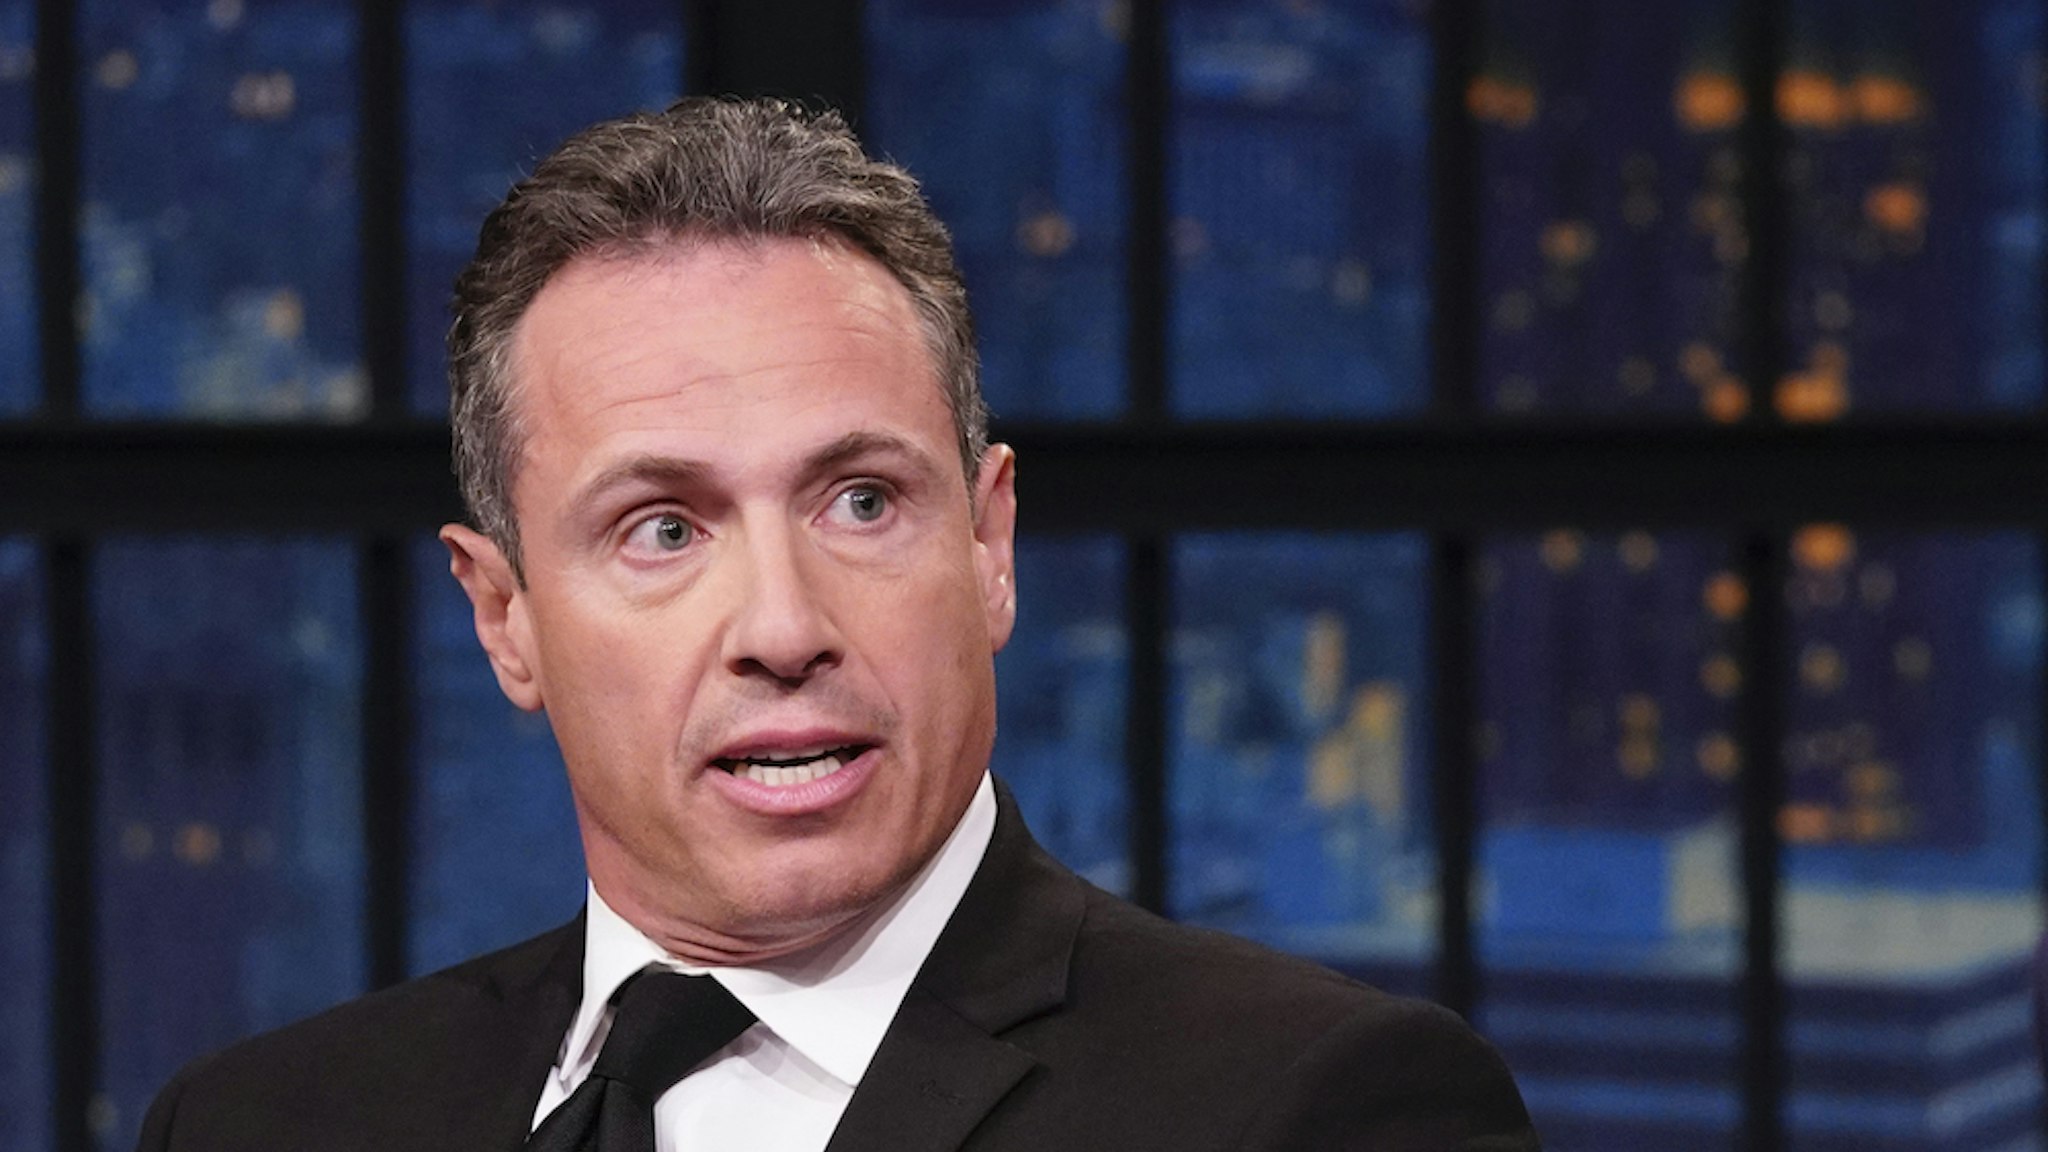 LATE NIGHT WITH SETH MEYERS -- Episode 867 -- Pictured: (l-r) CNN's Chris Cuomo during an interview with host Seth Meyers on August 1, 2019 -- (Photo by: Lloyd Bishop/NBC/NBCU Photo Bank)